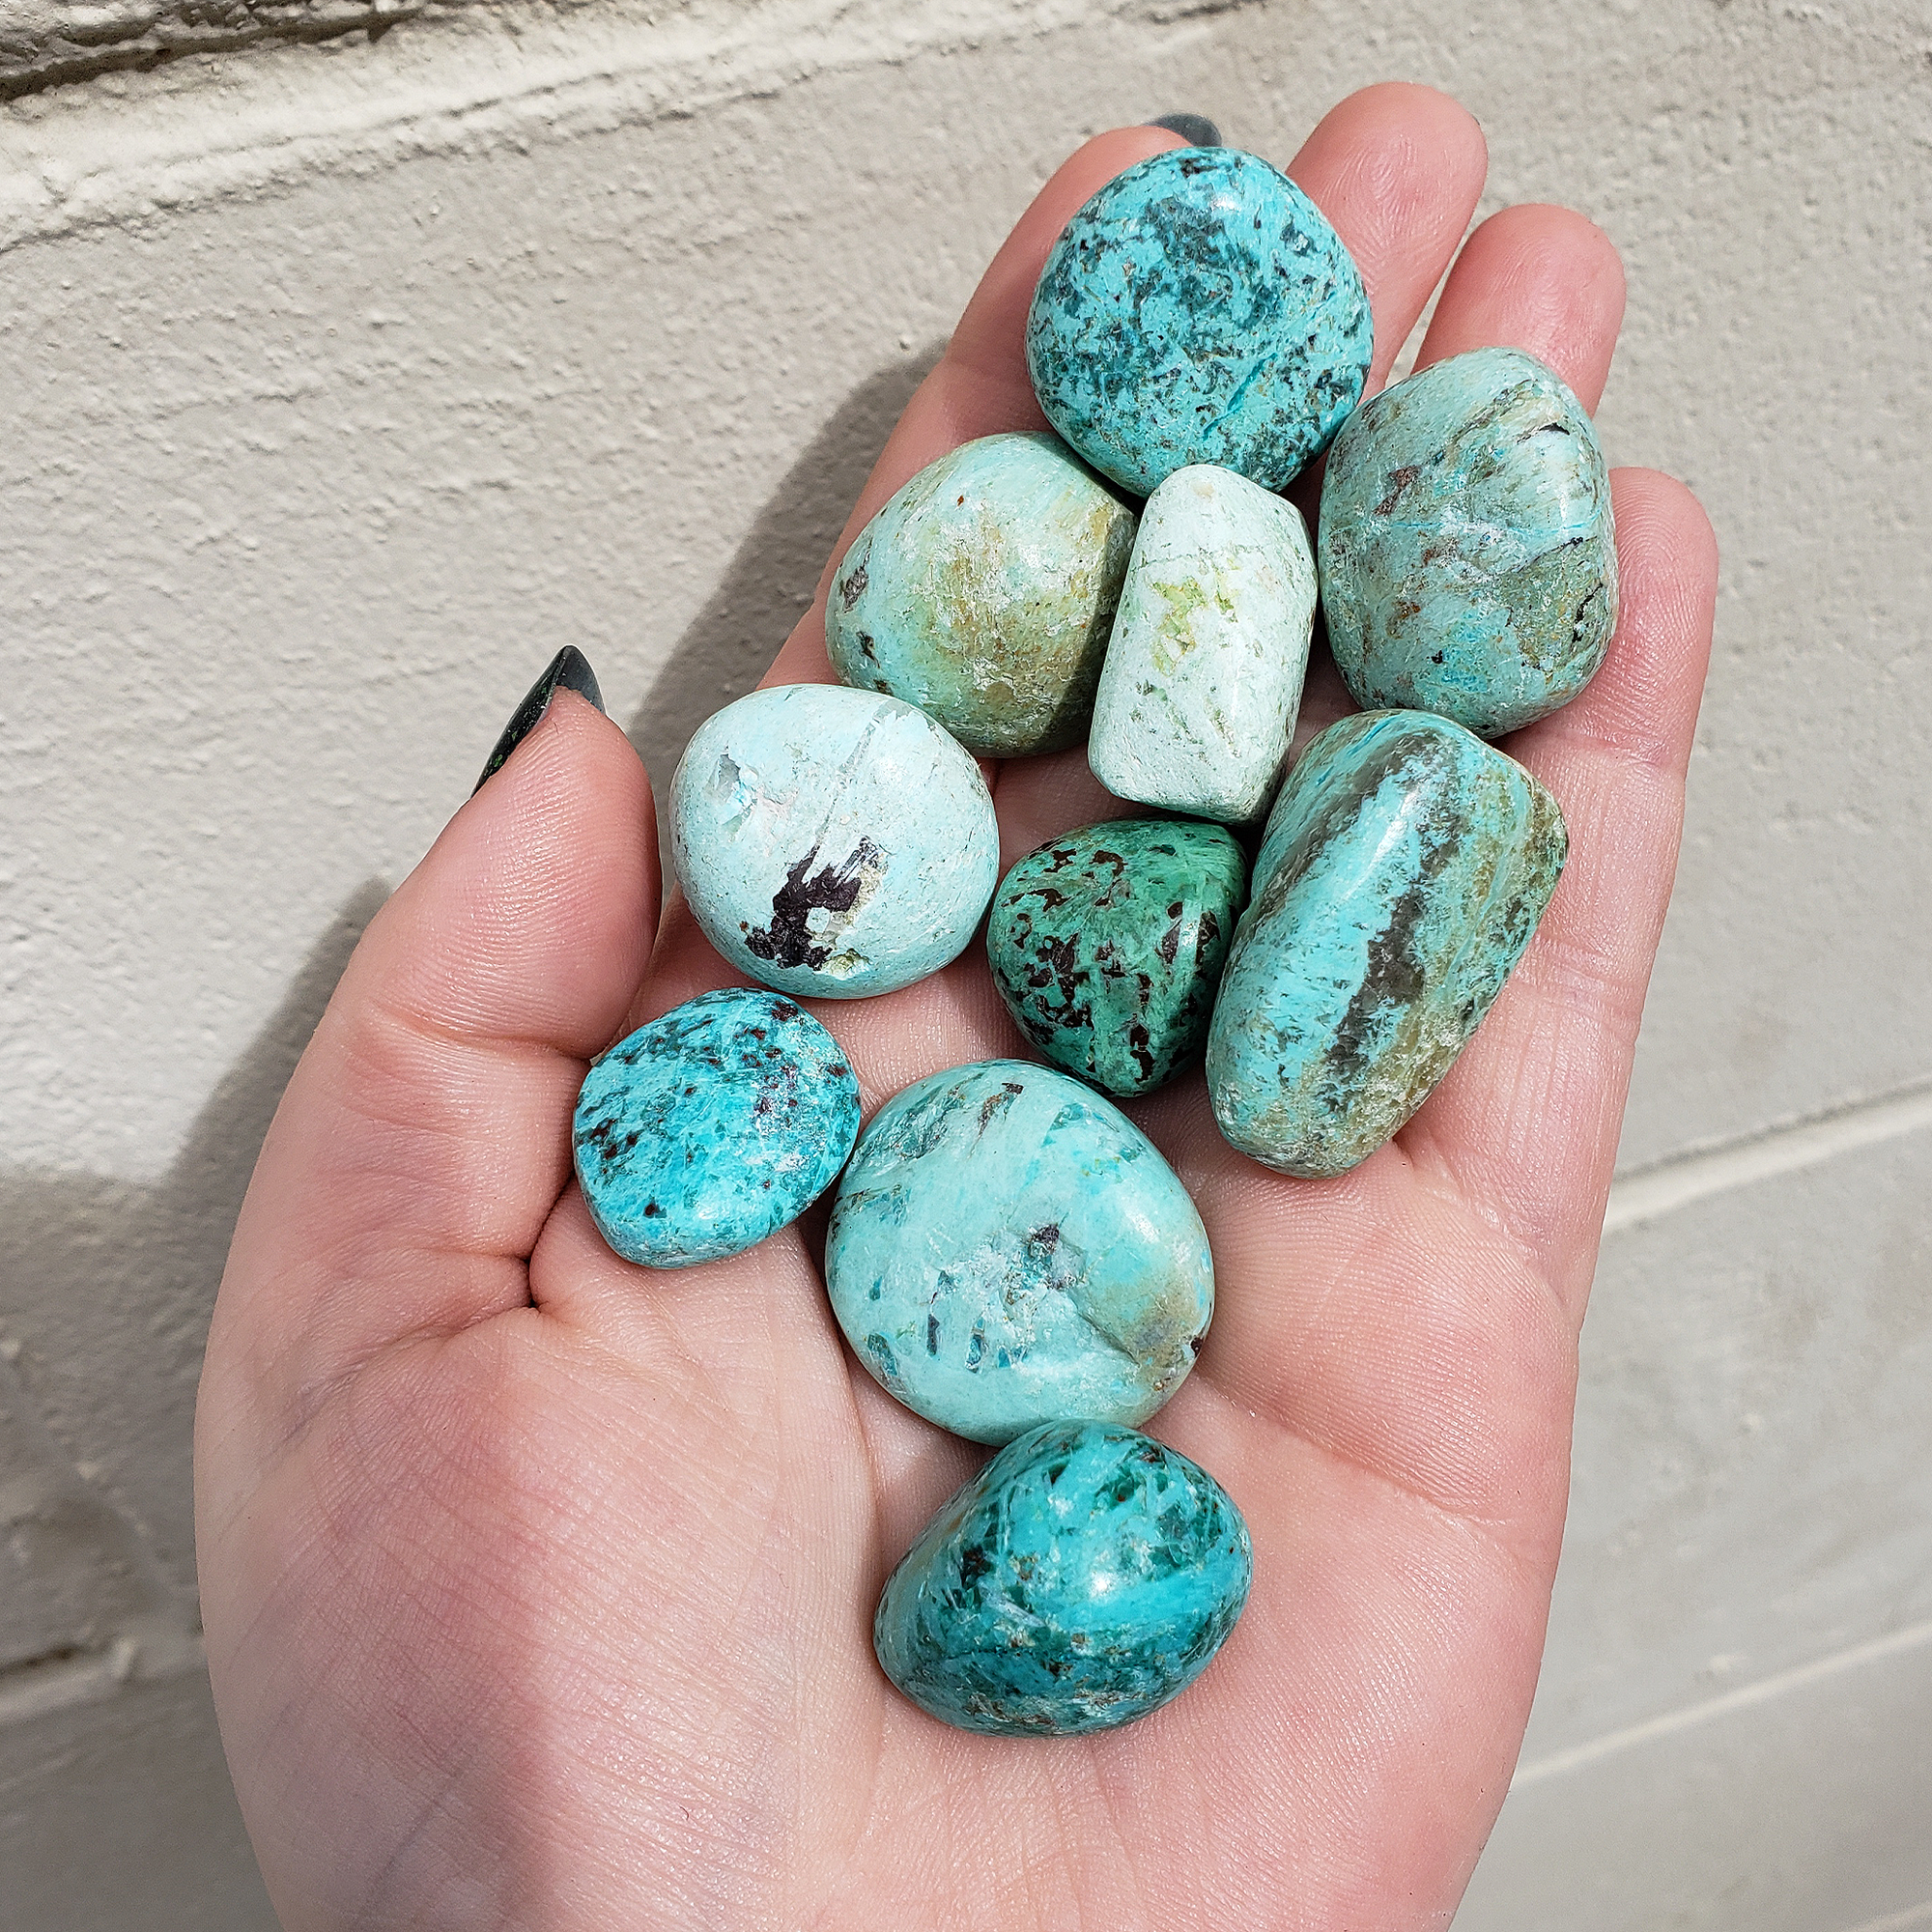 Peruvian Turquoise Natural Tumbled Stone - One Stone - Brick Background, Stones in Hand